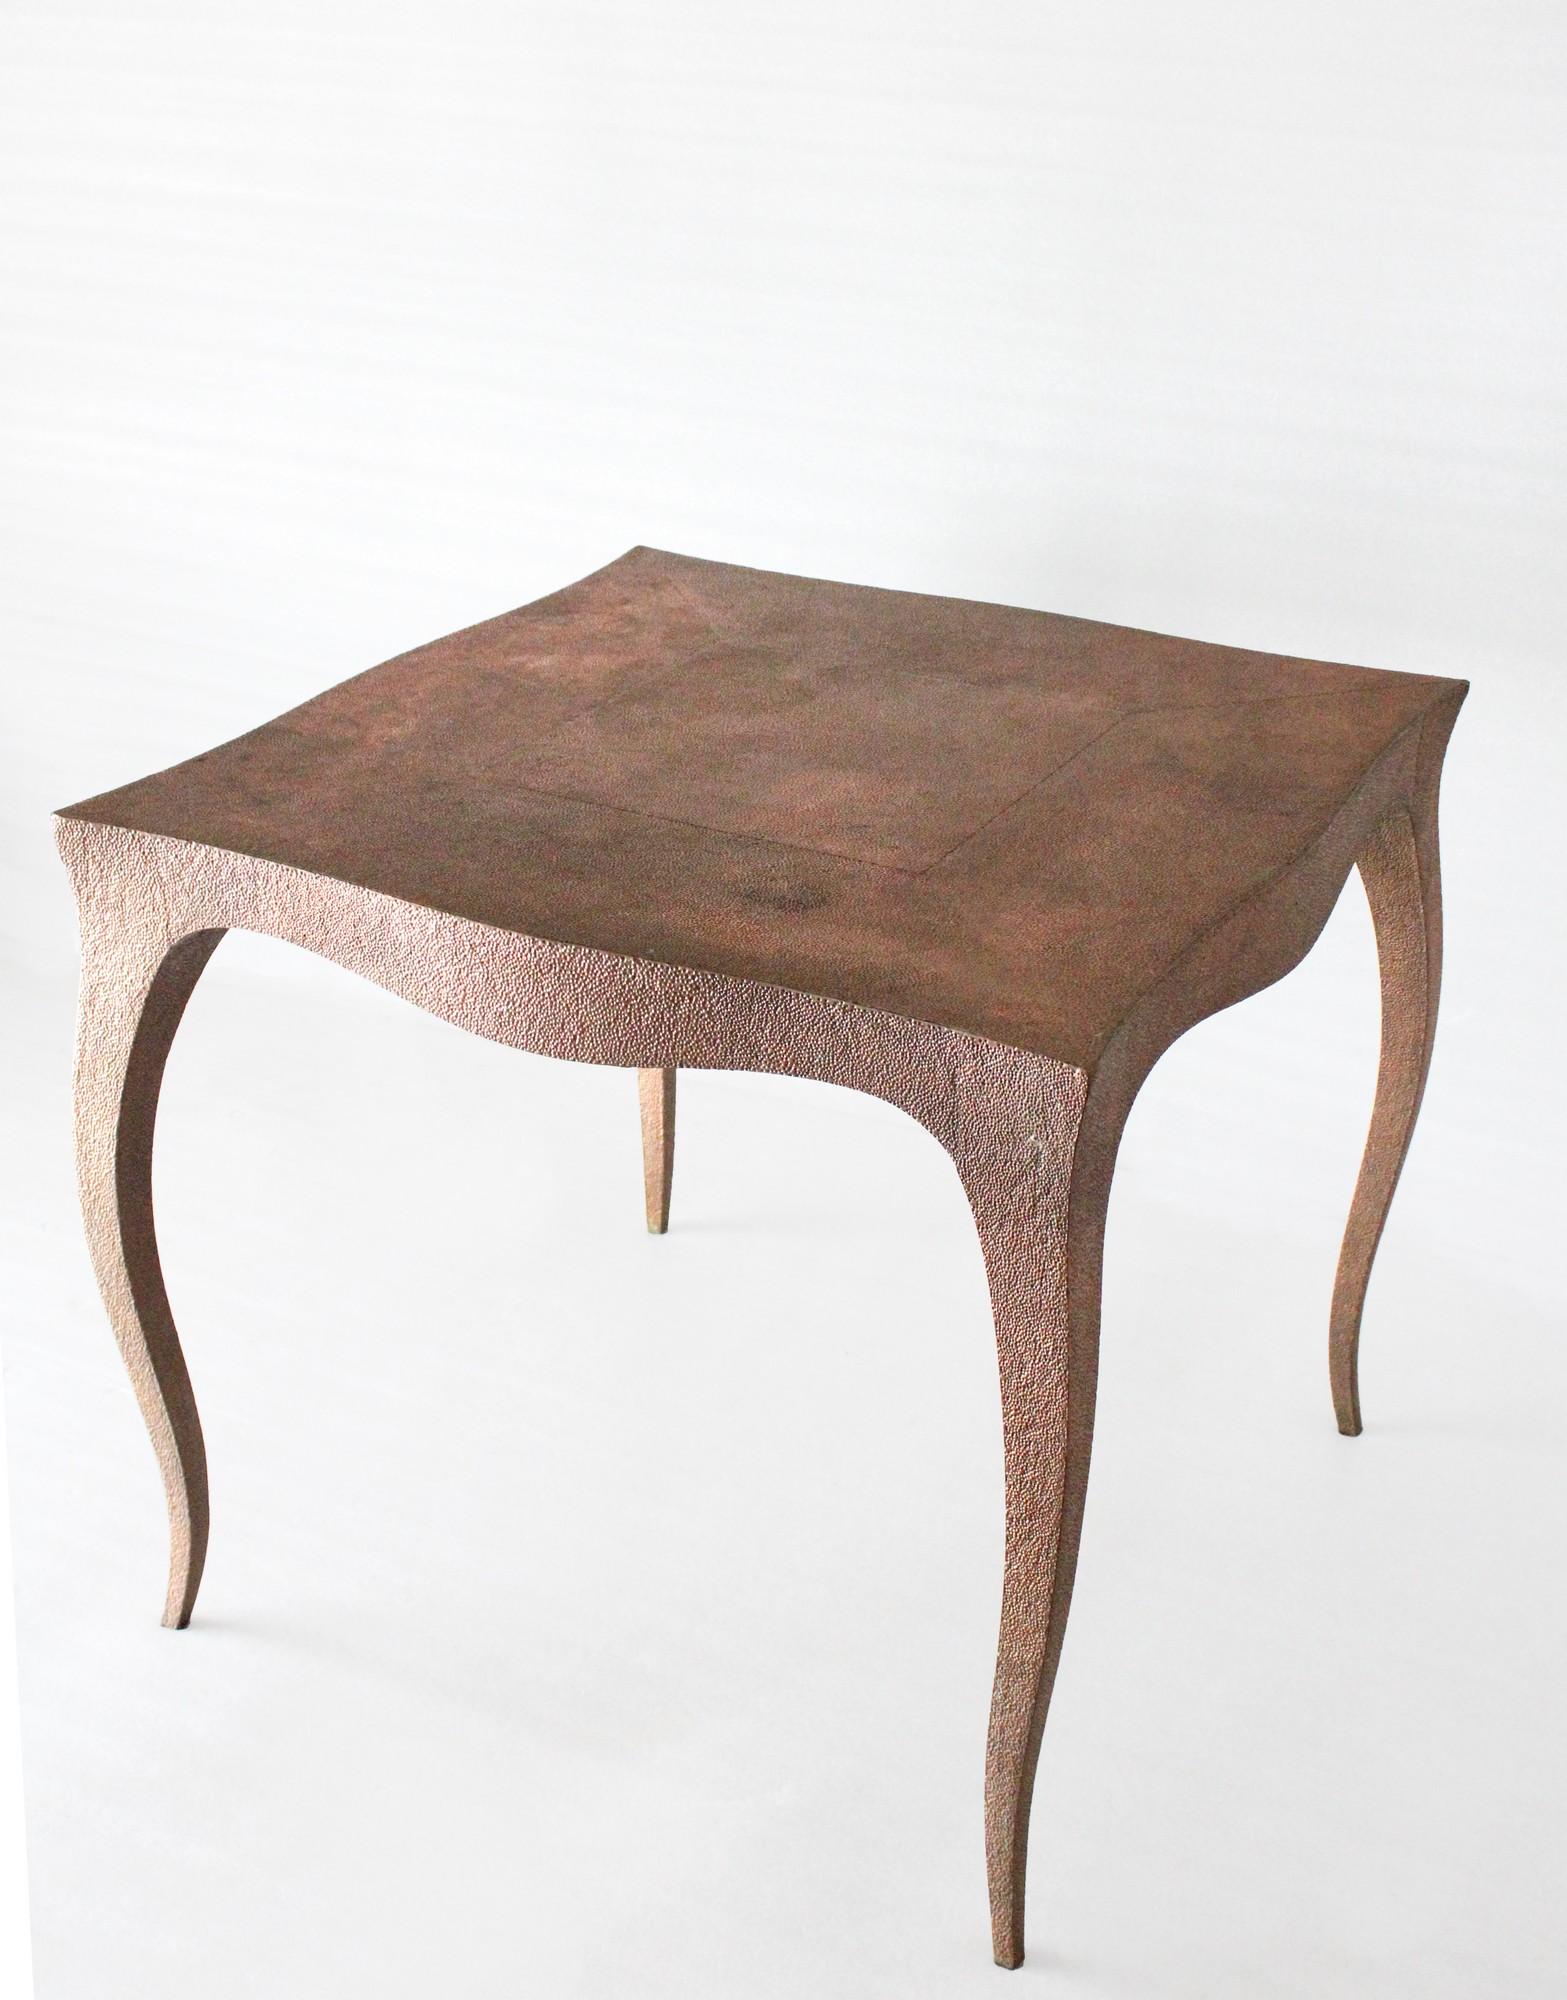 Other Louise Card Table Metal Clad Over Teakwood Handcrafted in India by Paul Mathieu For Sale